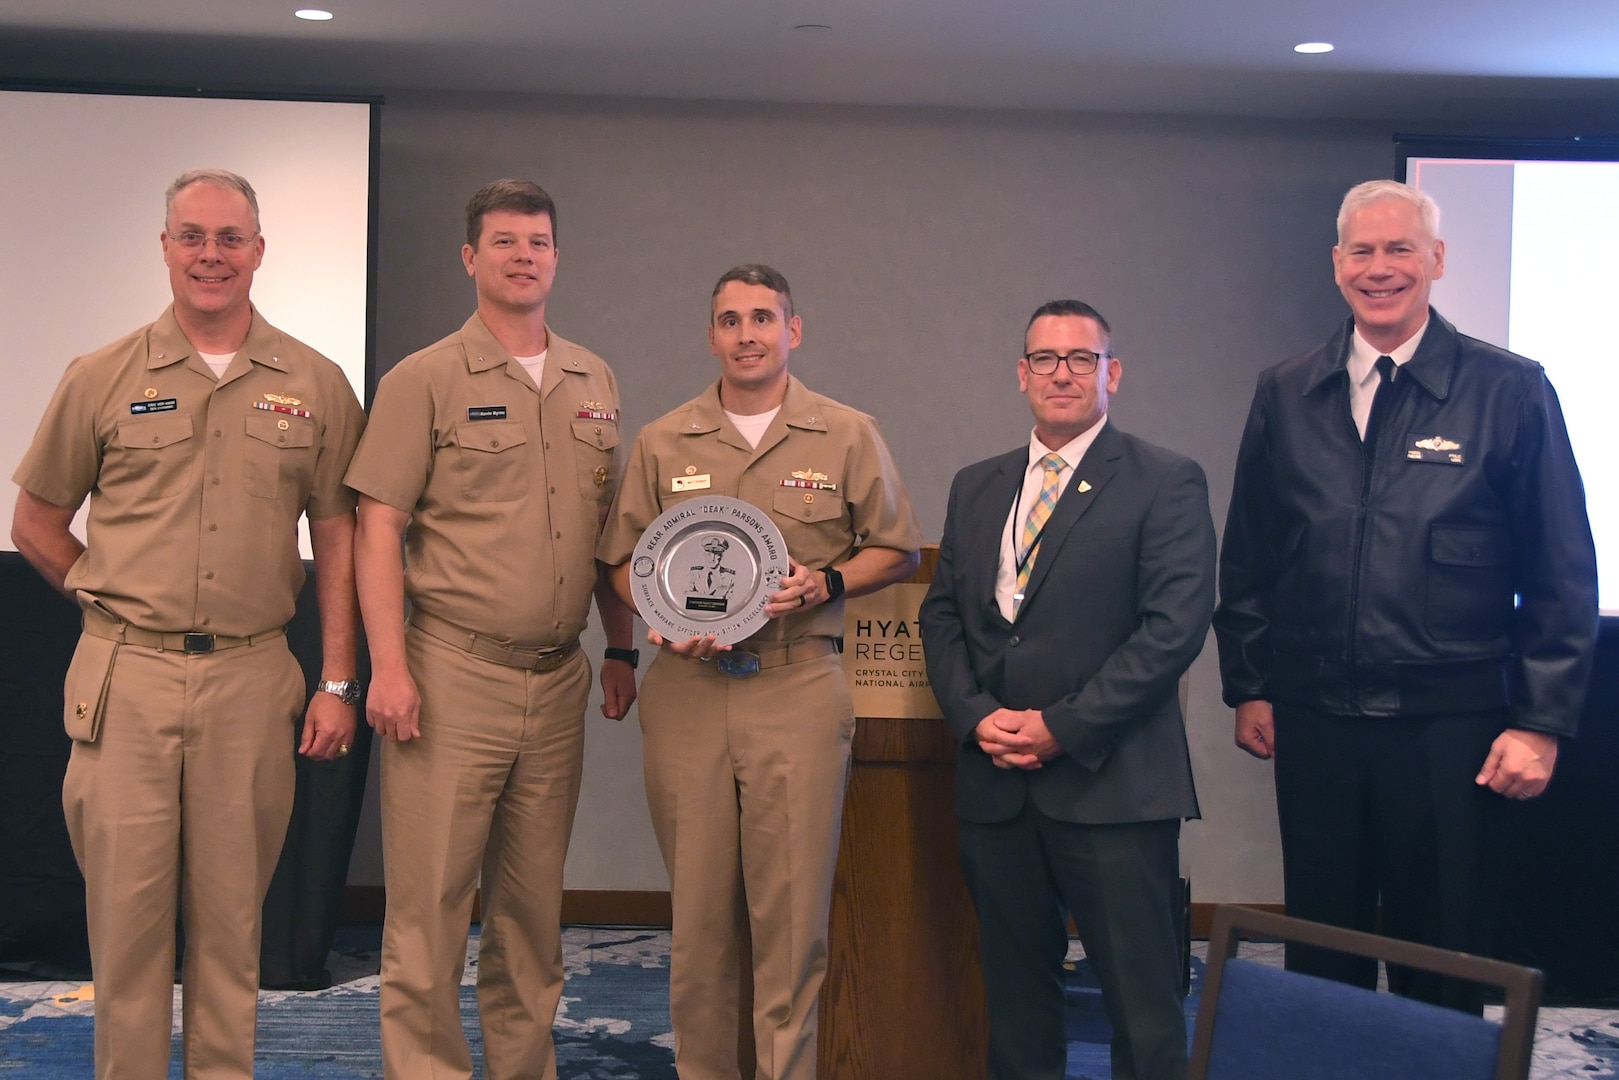 Capt. Jason Kipp  and Capt. Matthew Erdner Receive Acquisition Leadership and Excellence Awards